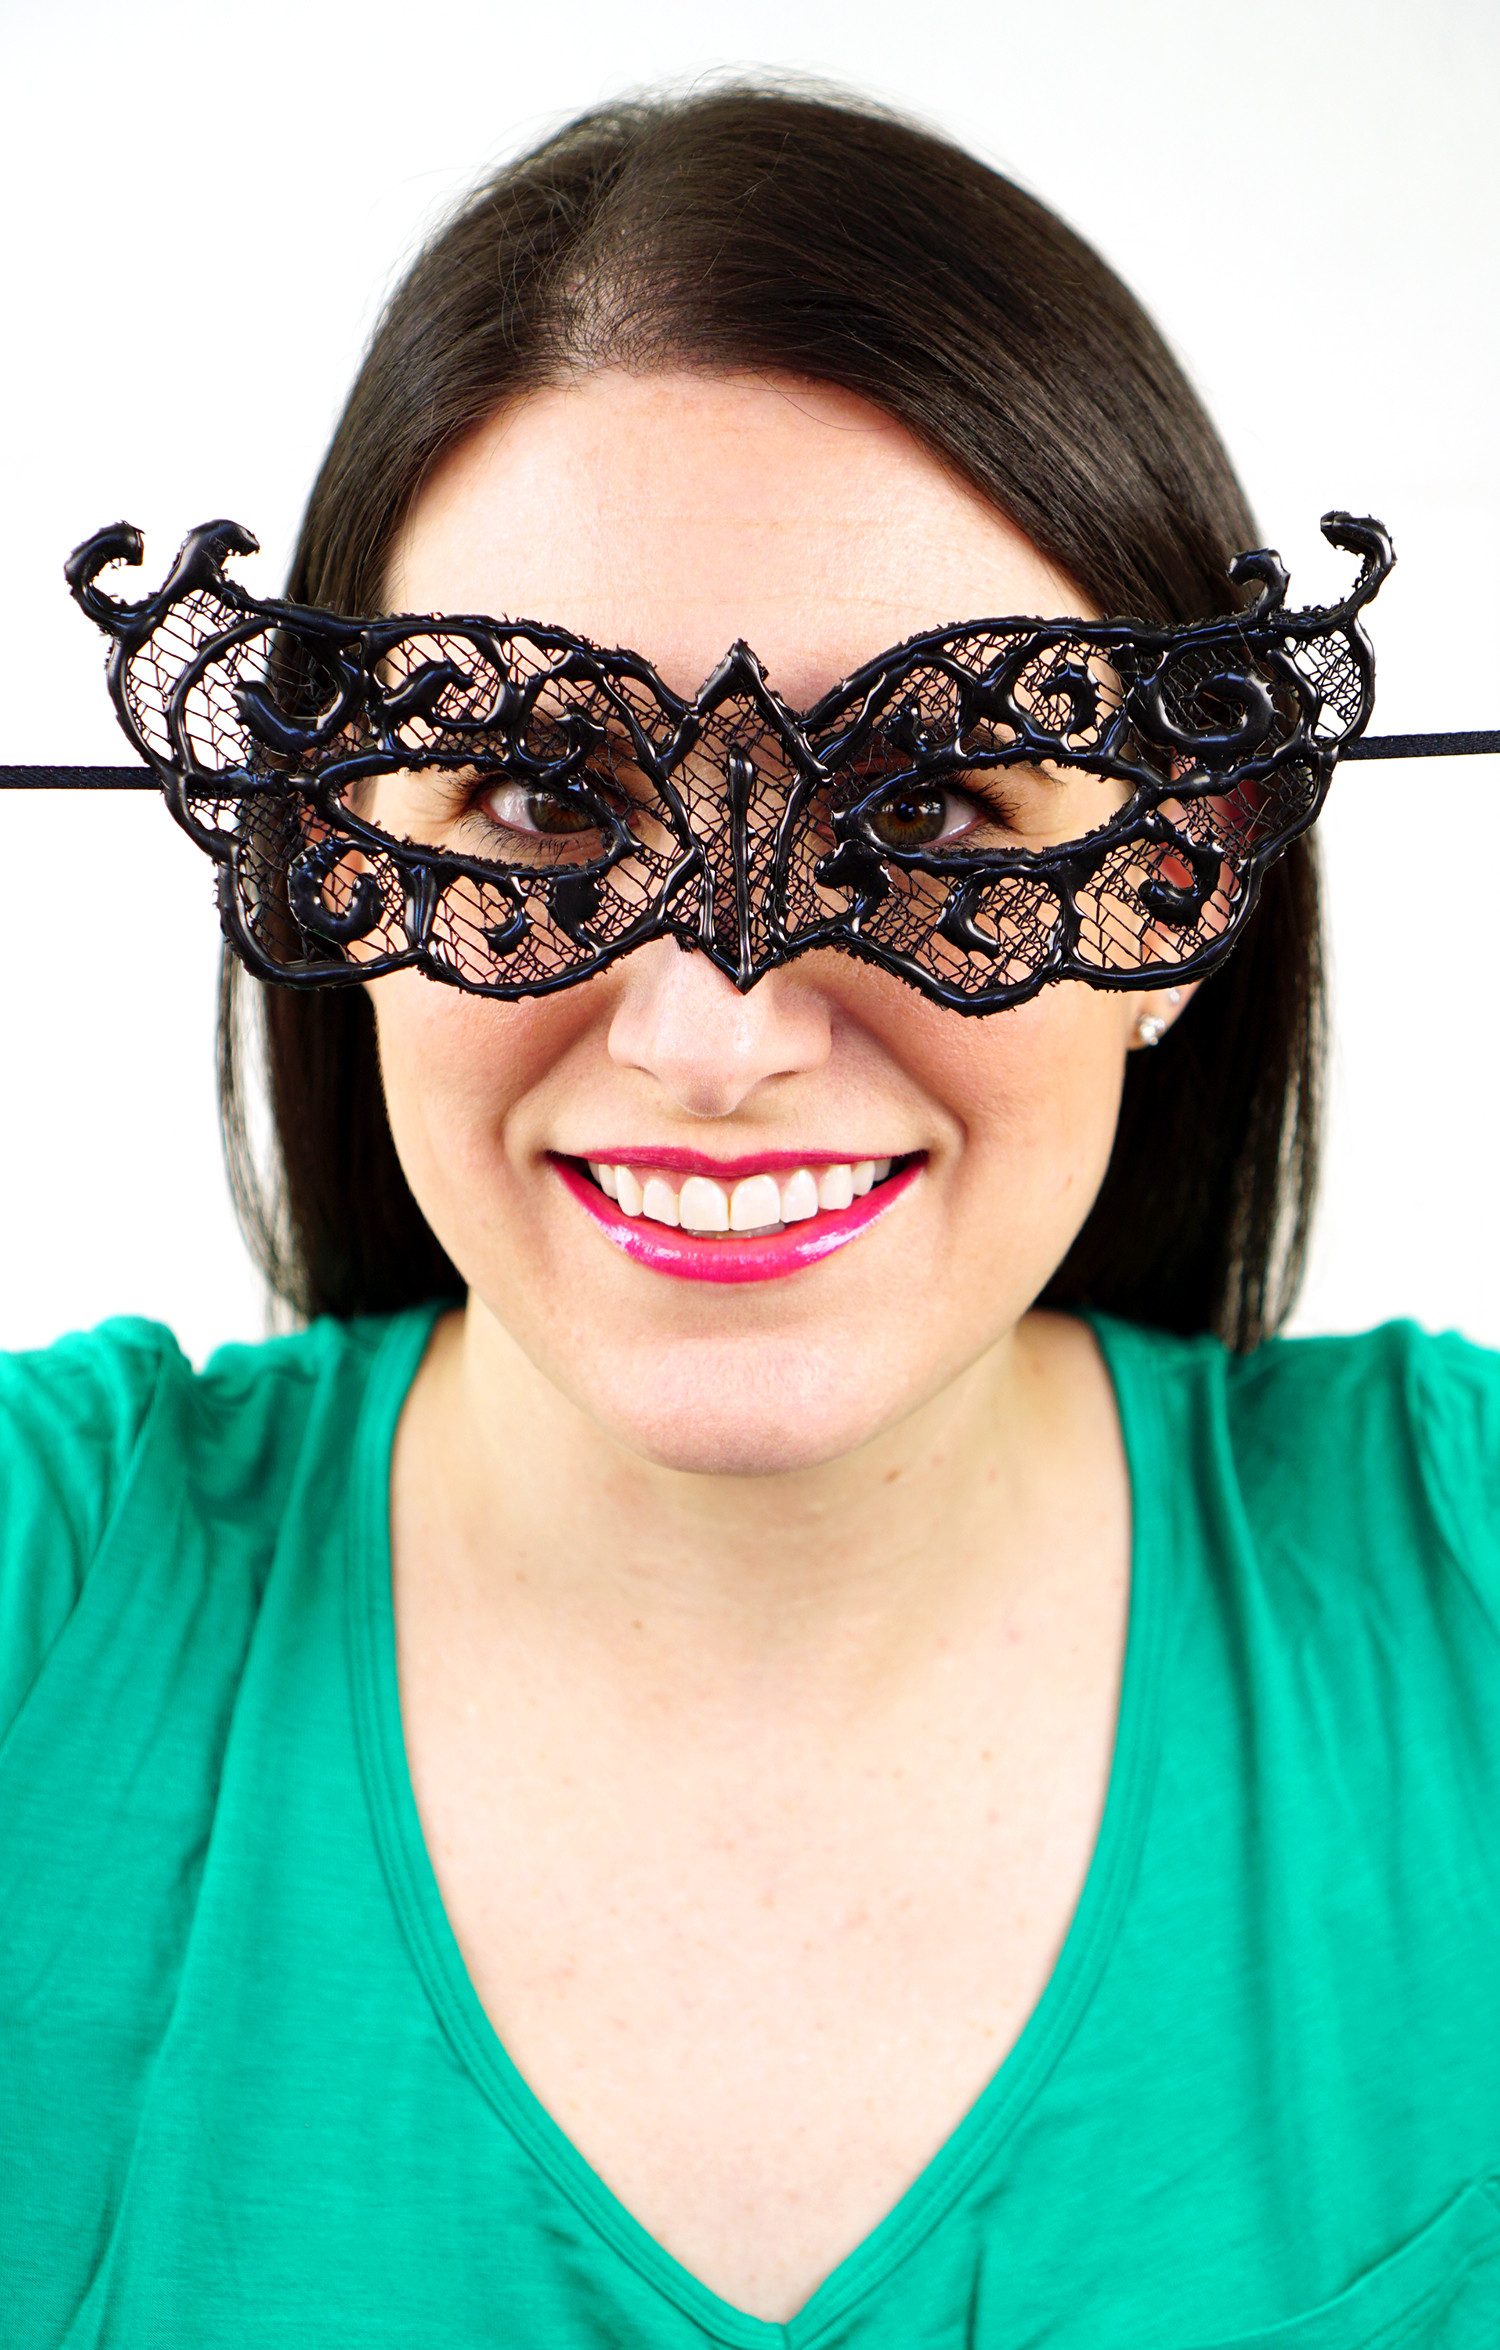 DIY Masquerade Mask
 Easy DIY Lace Masquerade Mask from Hot Glue Happiness is